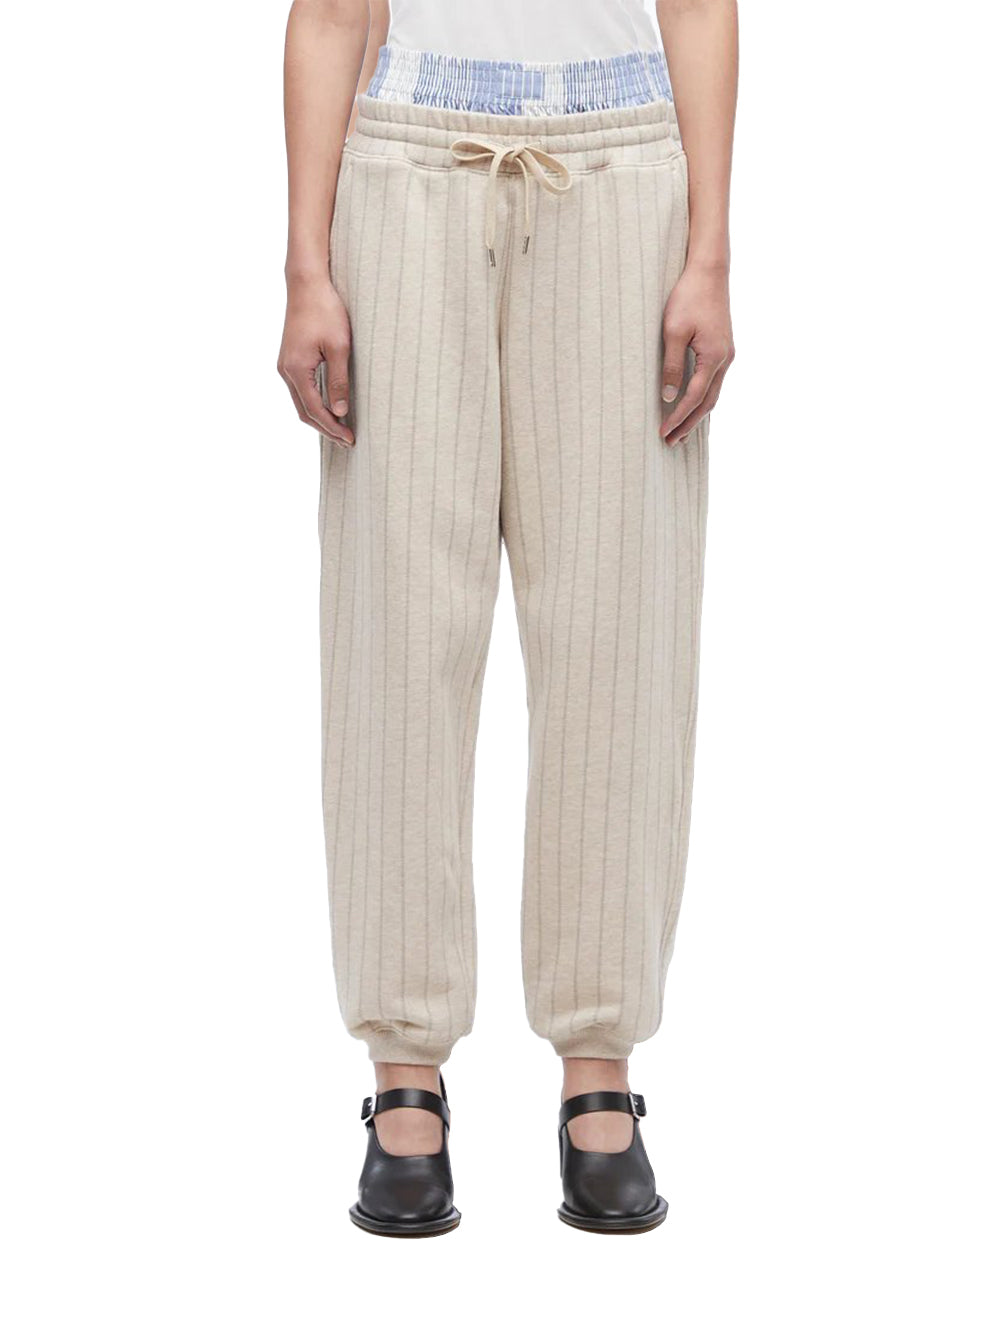 3.1-Phillip-Lim-Striped-Relaxed-Sweatpants-Oat-Multi-1